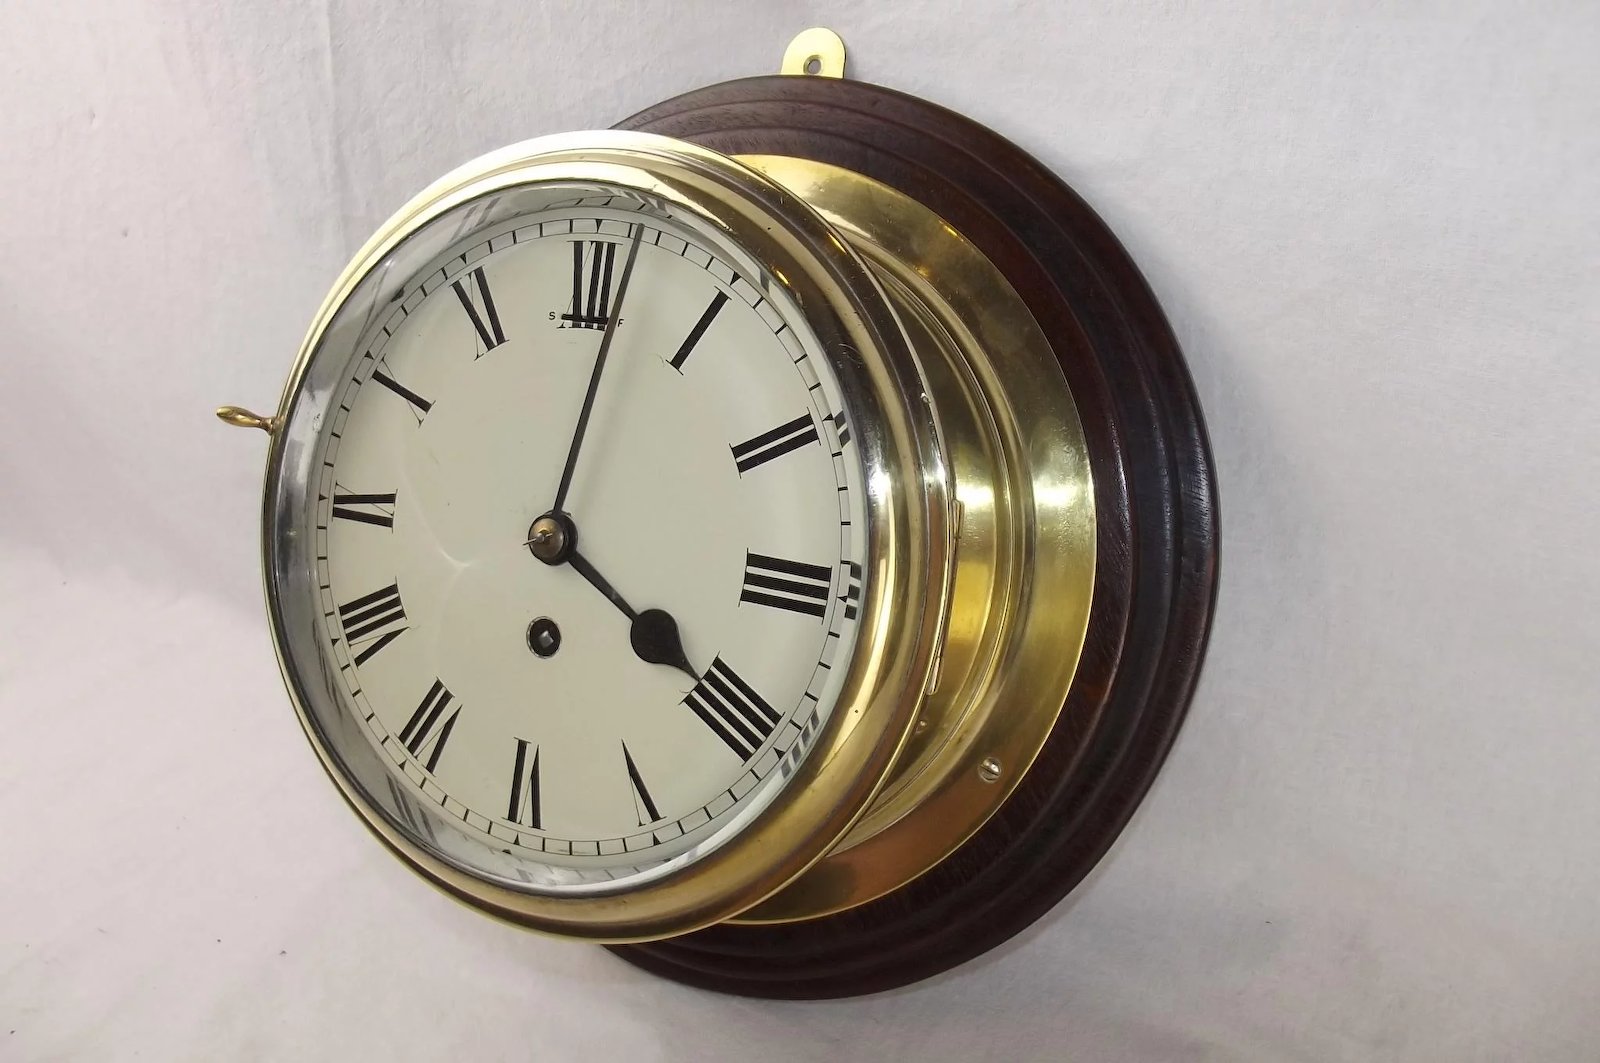 Original Mounted Fusee Ships Clock - Sally Antiques